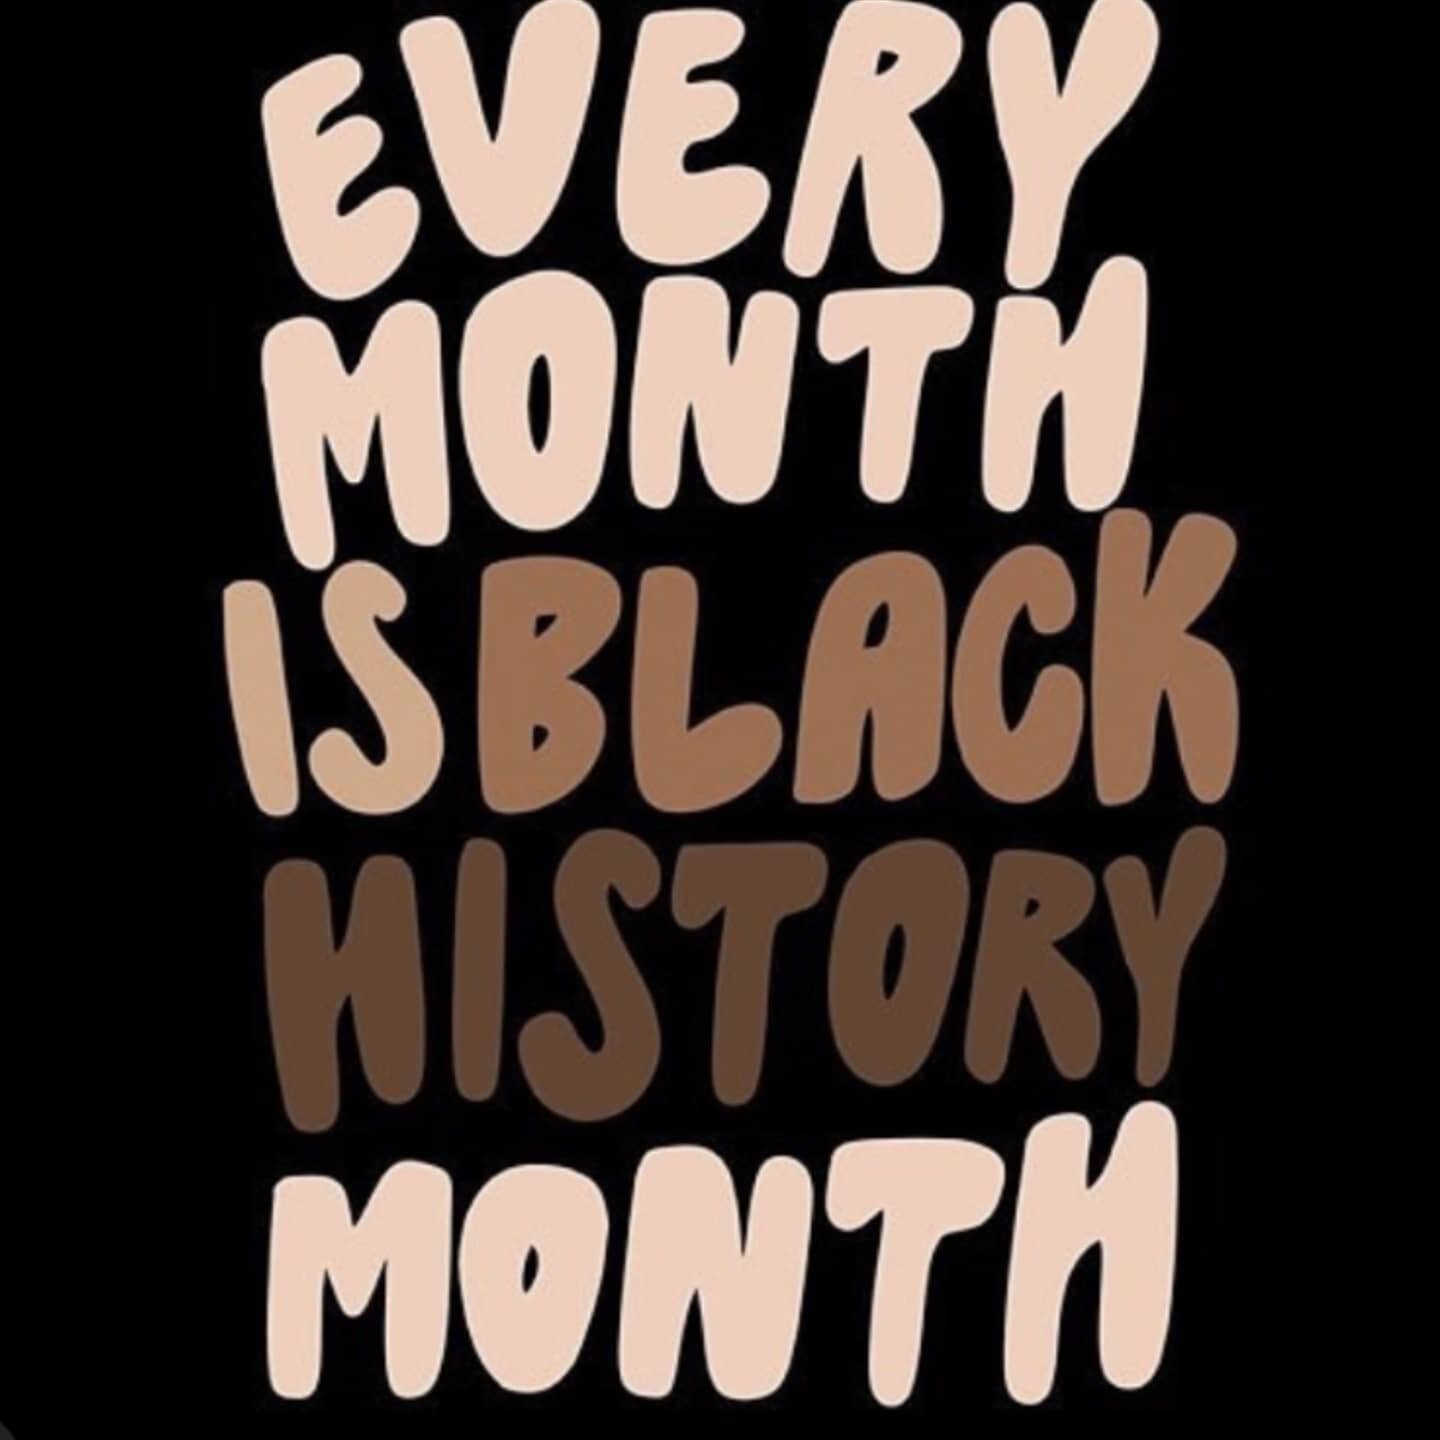 Black History is American History. 
The celebration of Black culture, excellence and history should not be contained to 28 days but should be a practice from the classroom to the boardroom and in between. 

Honor this month with being intentional abo